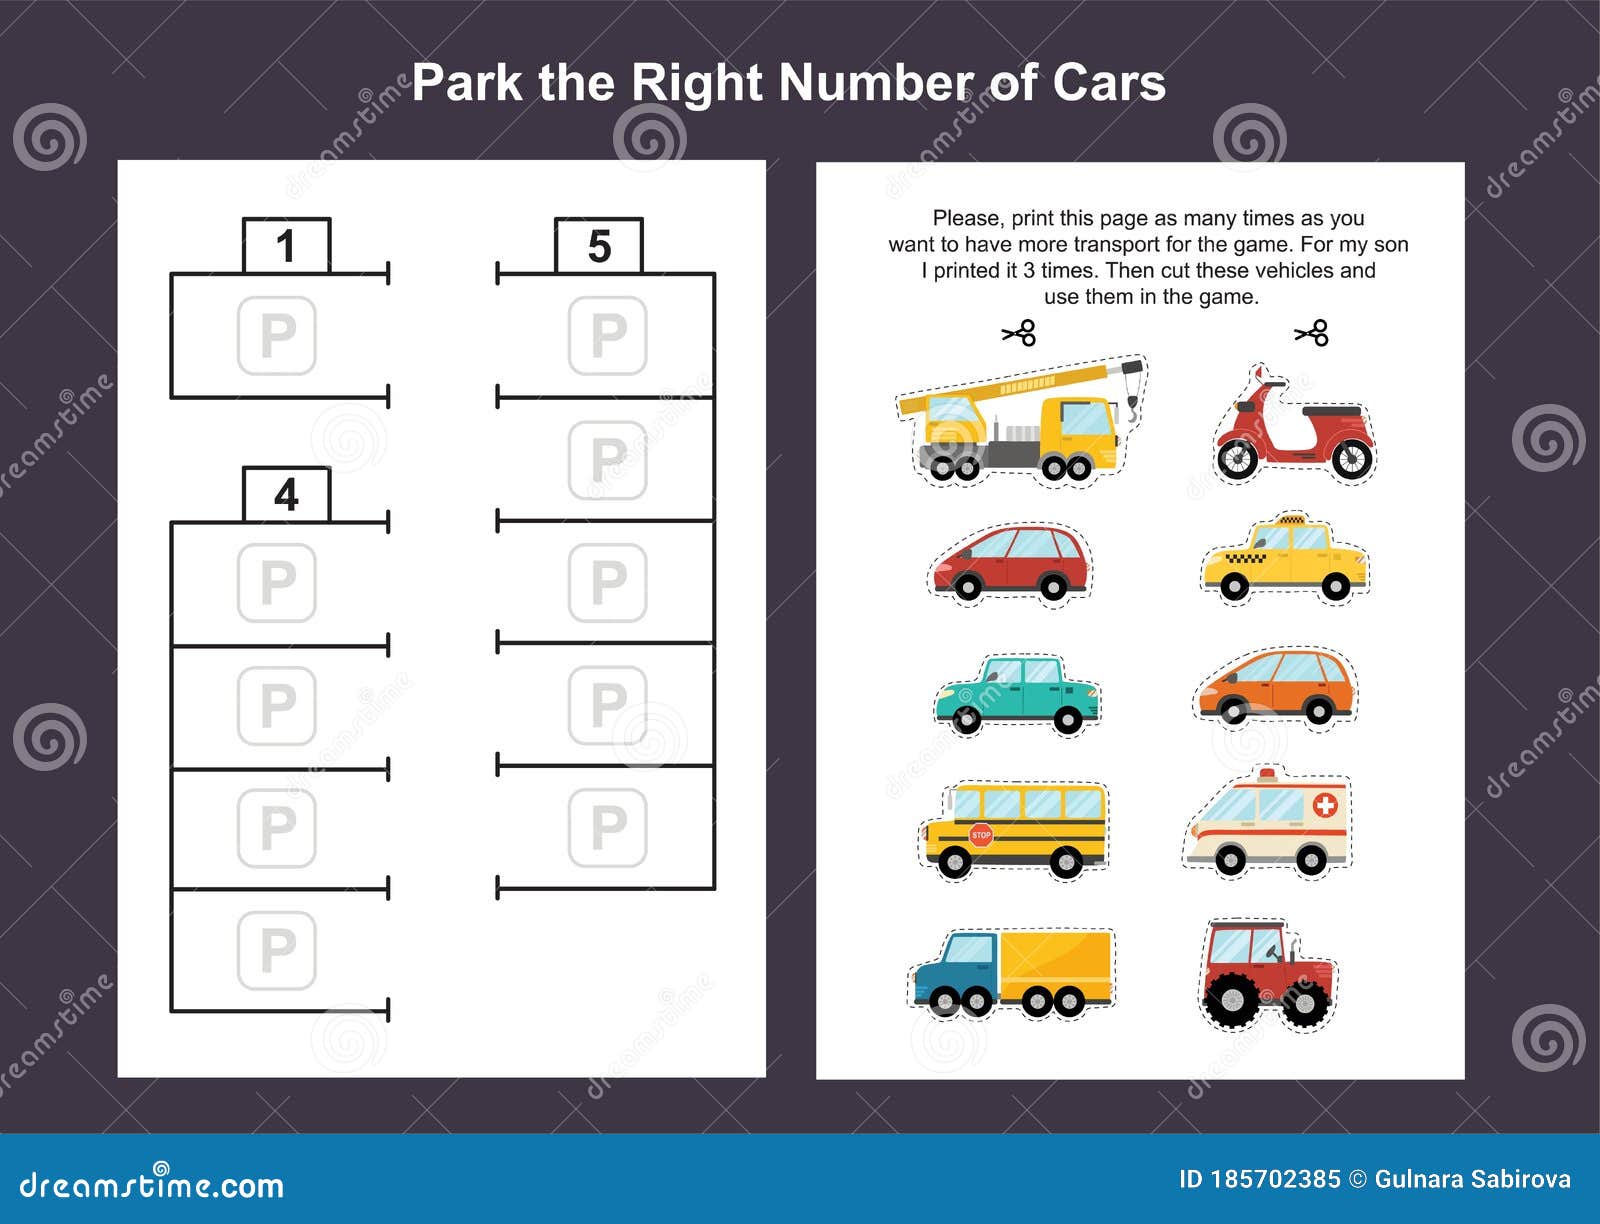 car-parking-template-free-download